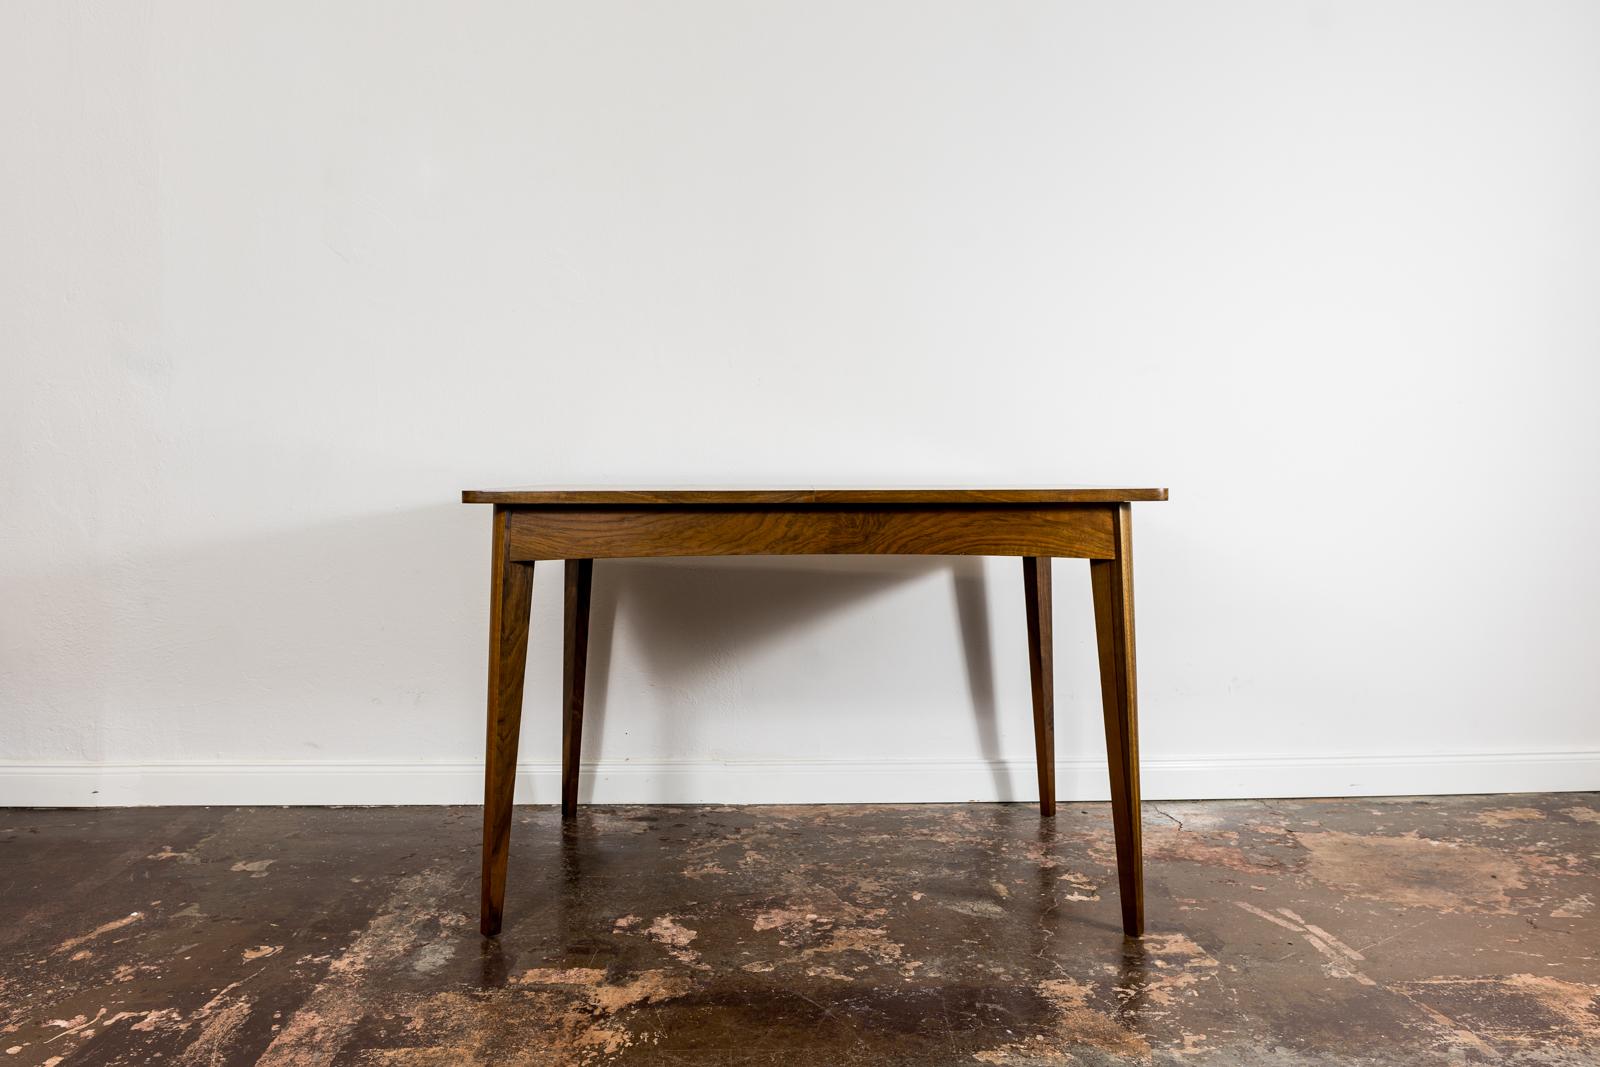 Mid-Century Modern Walnut Dining Table 1960's, Poland.
Completely restored.